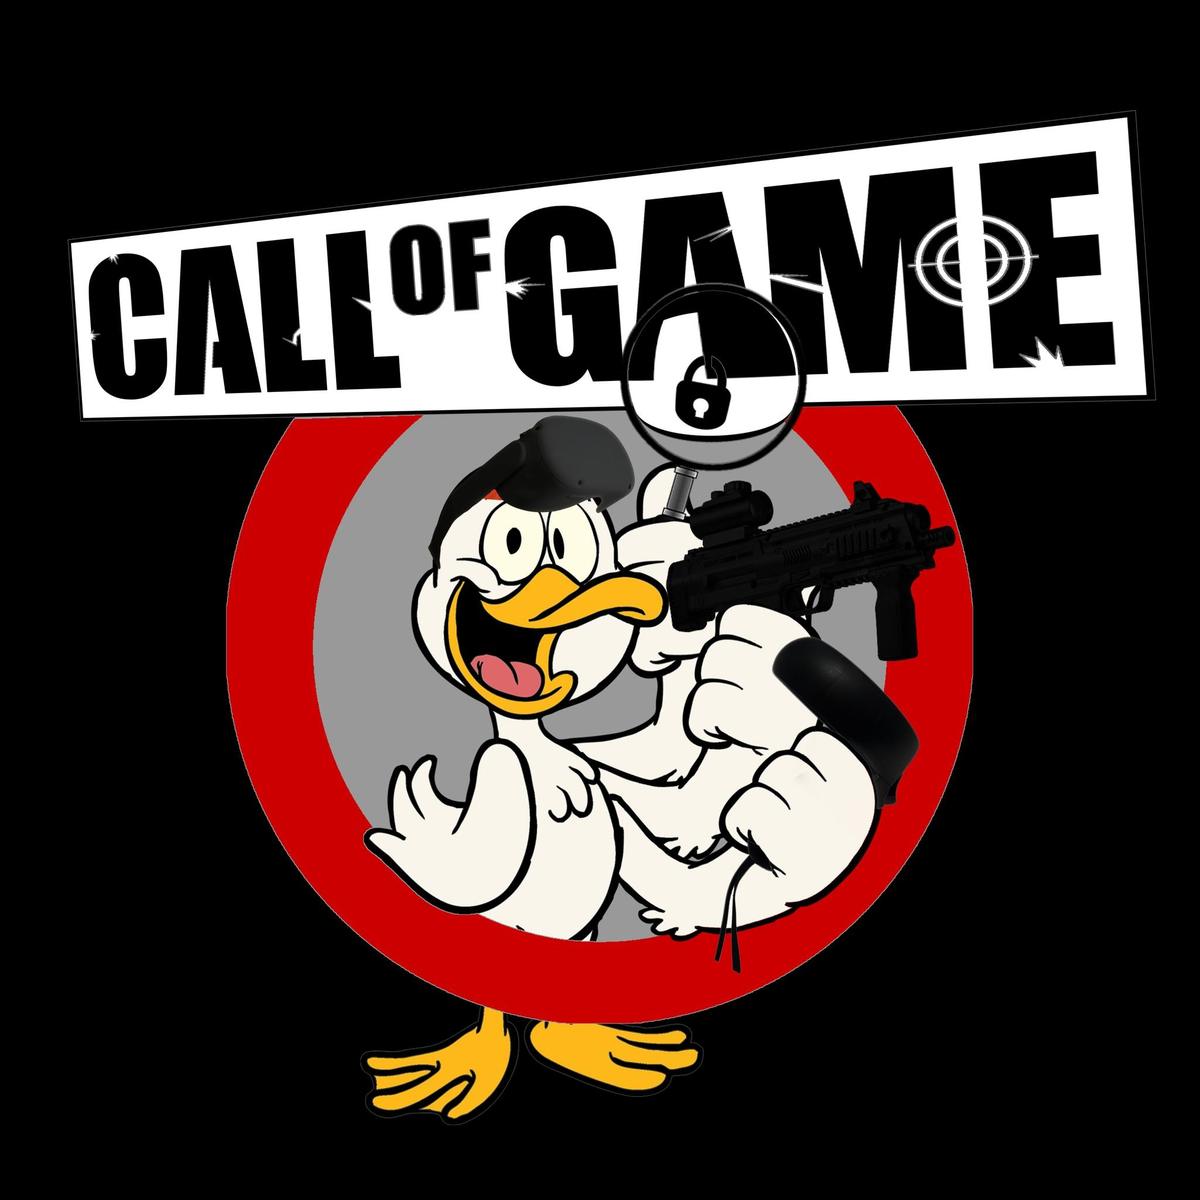 Call Of Game 